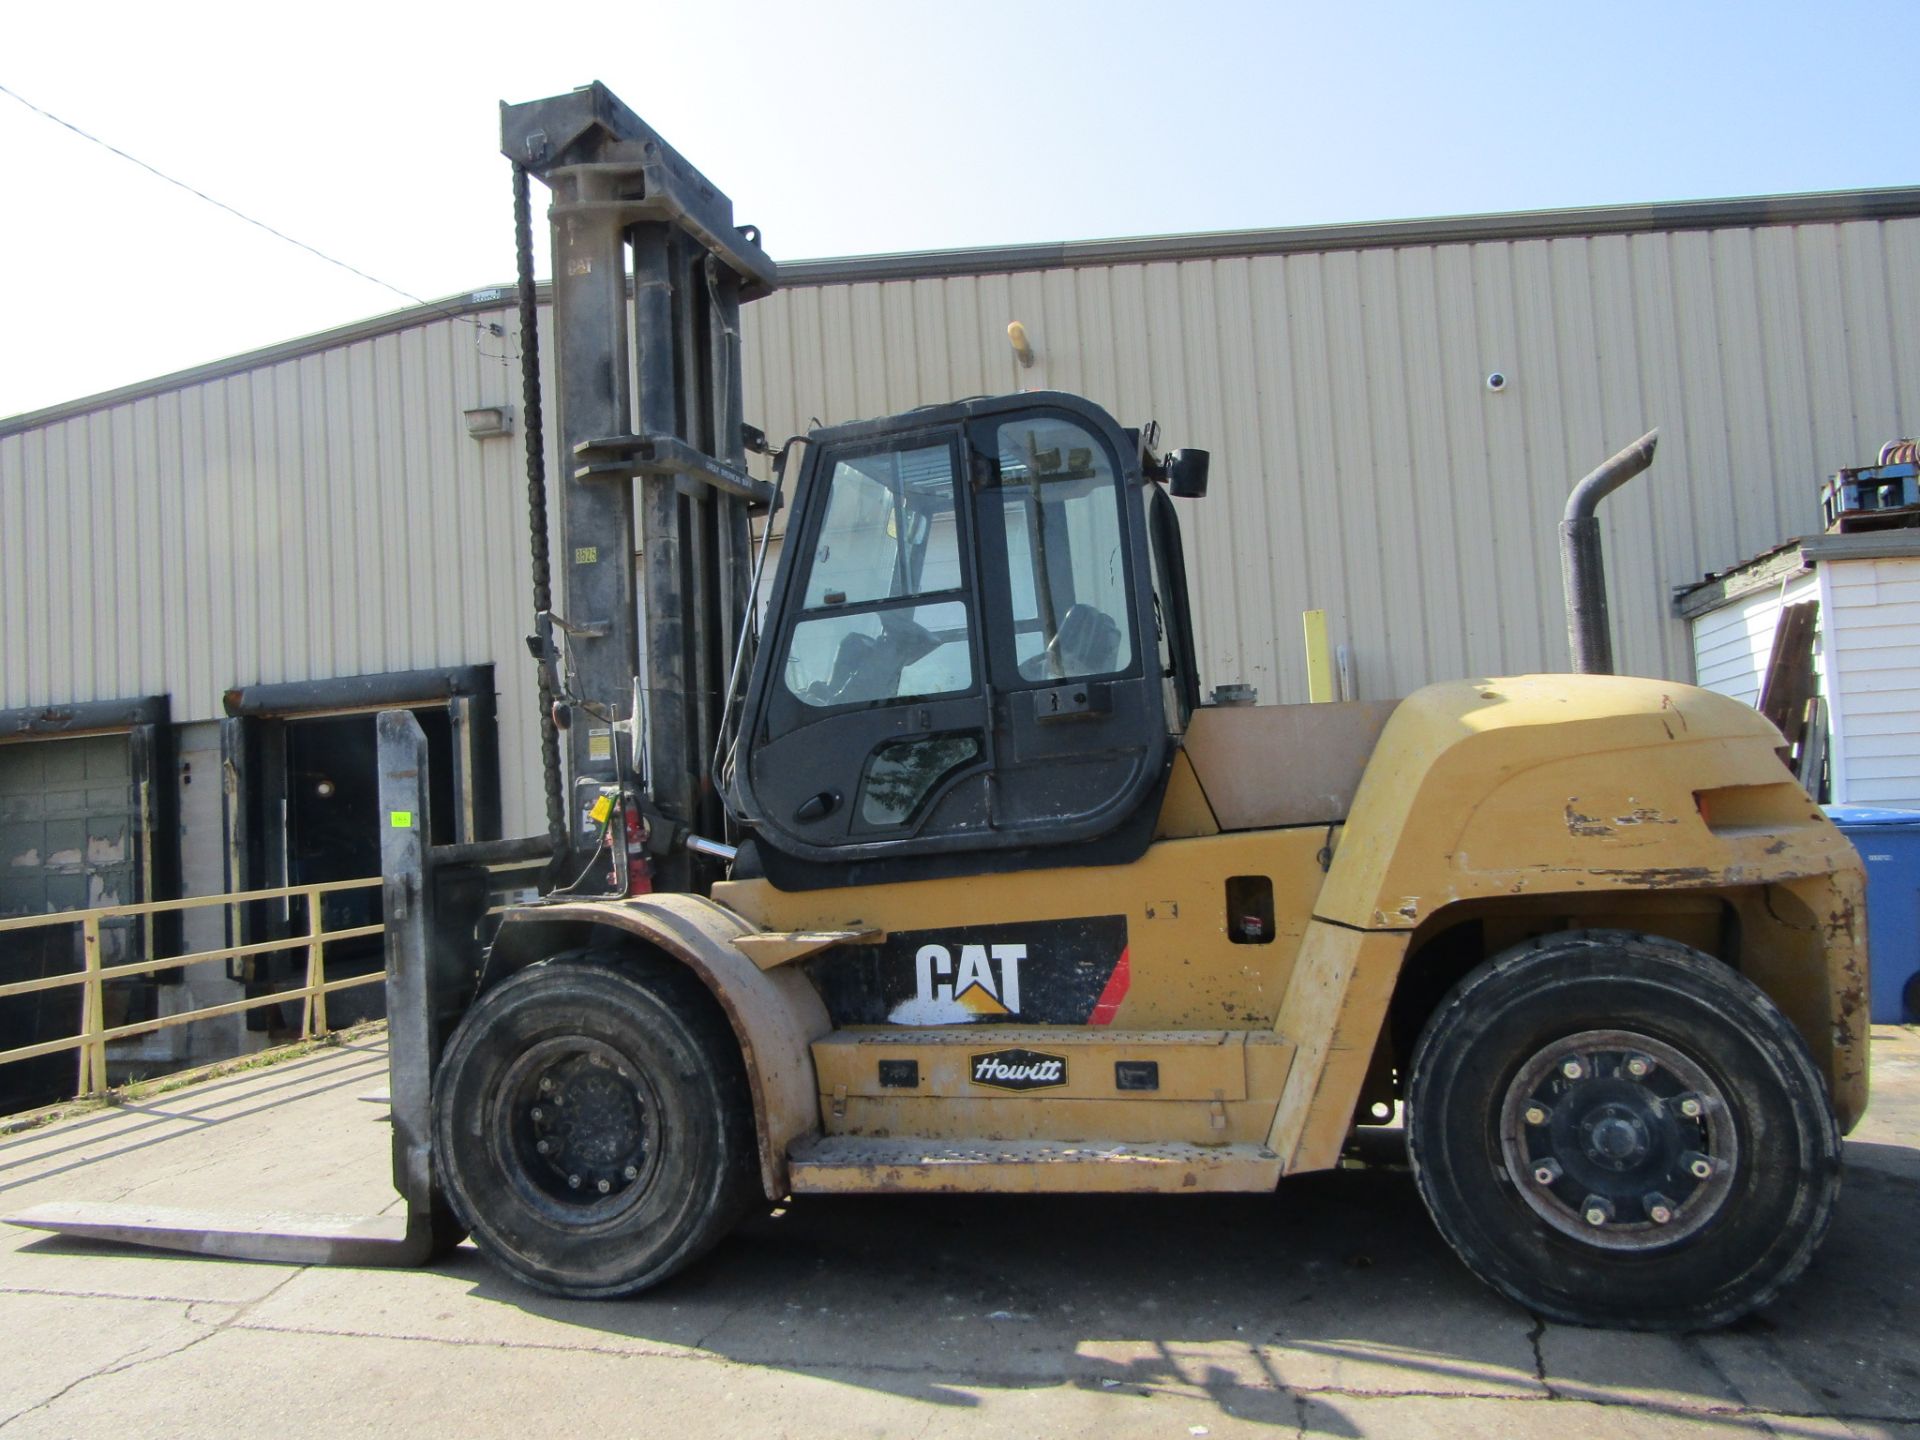 2008 CAT 33000lbs OUTDOOR Forklift with dual front tires & 6' Forks - diesel powered